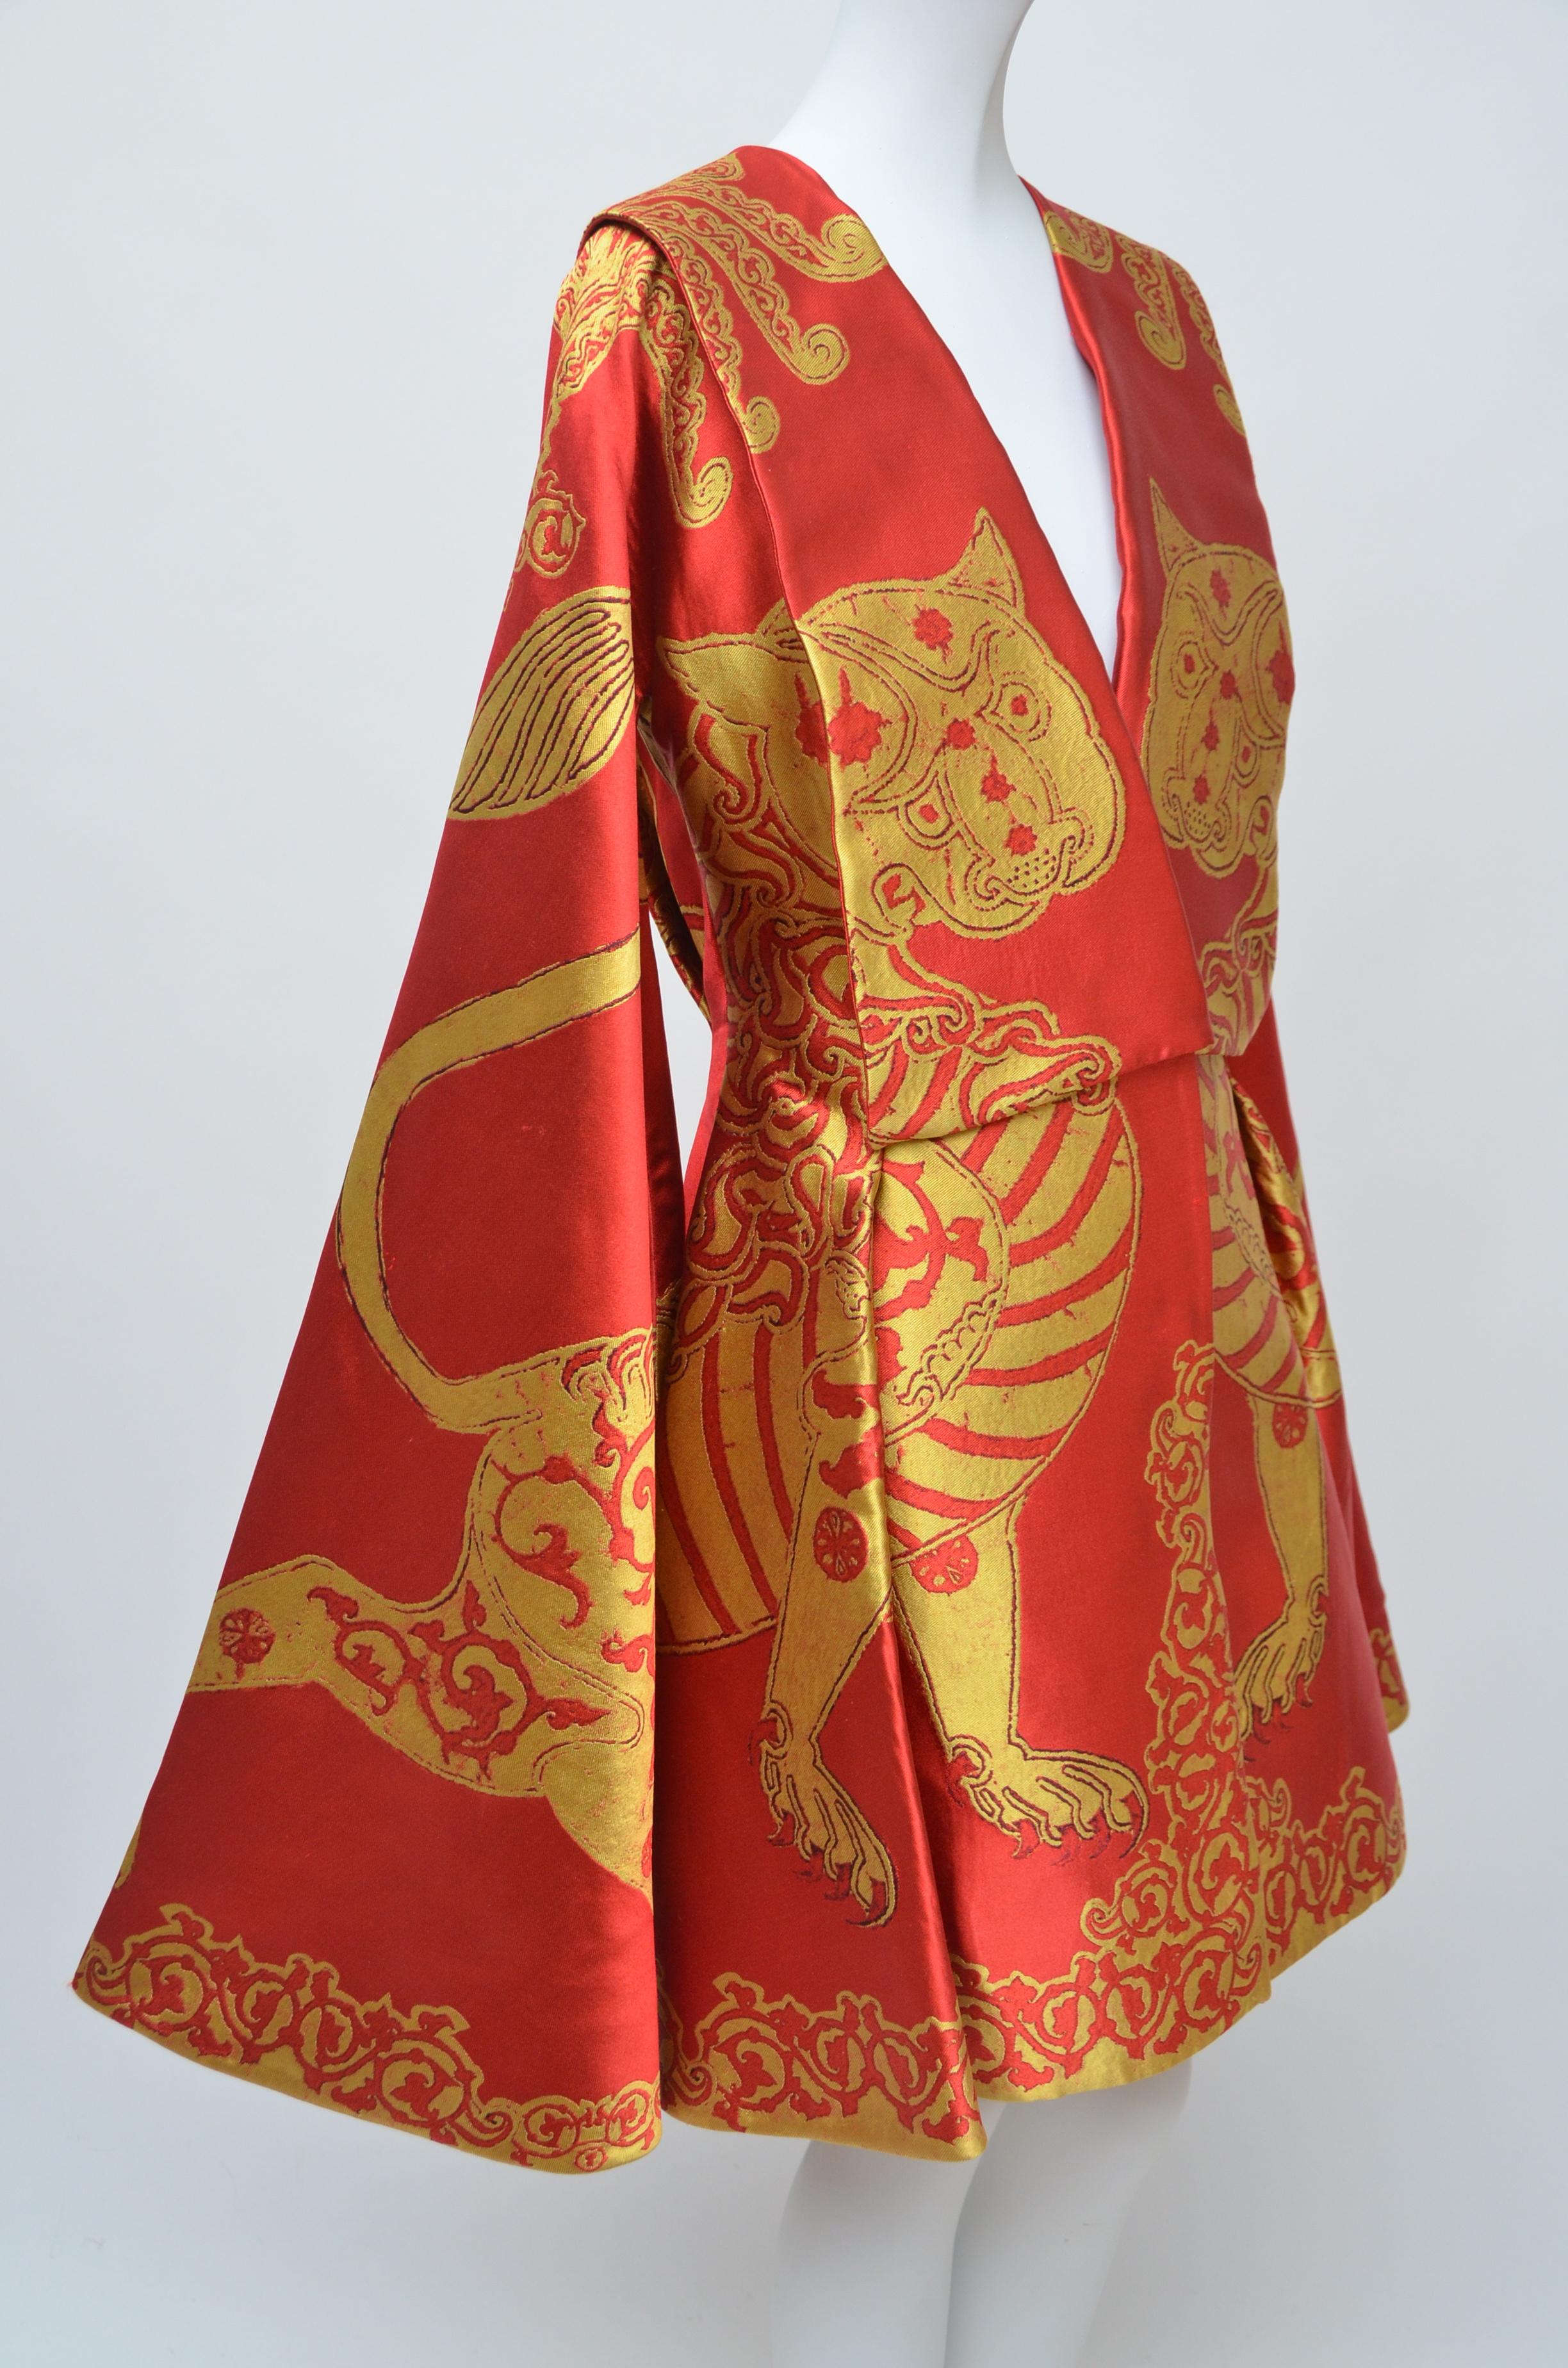 A fine Alexander McQueen cape dress. one of the sixteen designs made for his final collection from Autumn-Winter, 2010. 
Heavy scarlet and yellow gazar, woven with heraldic beasts, the wide gothic sleeves attached to the lower skirt sides.